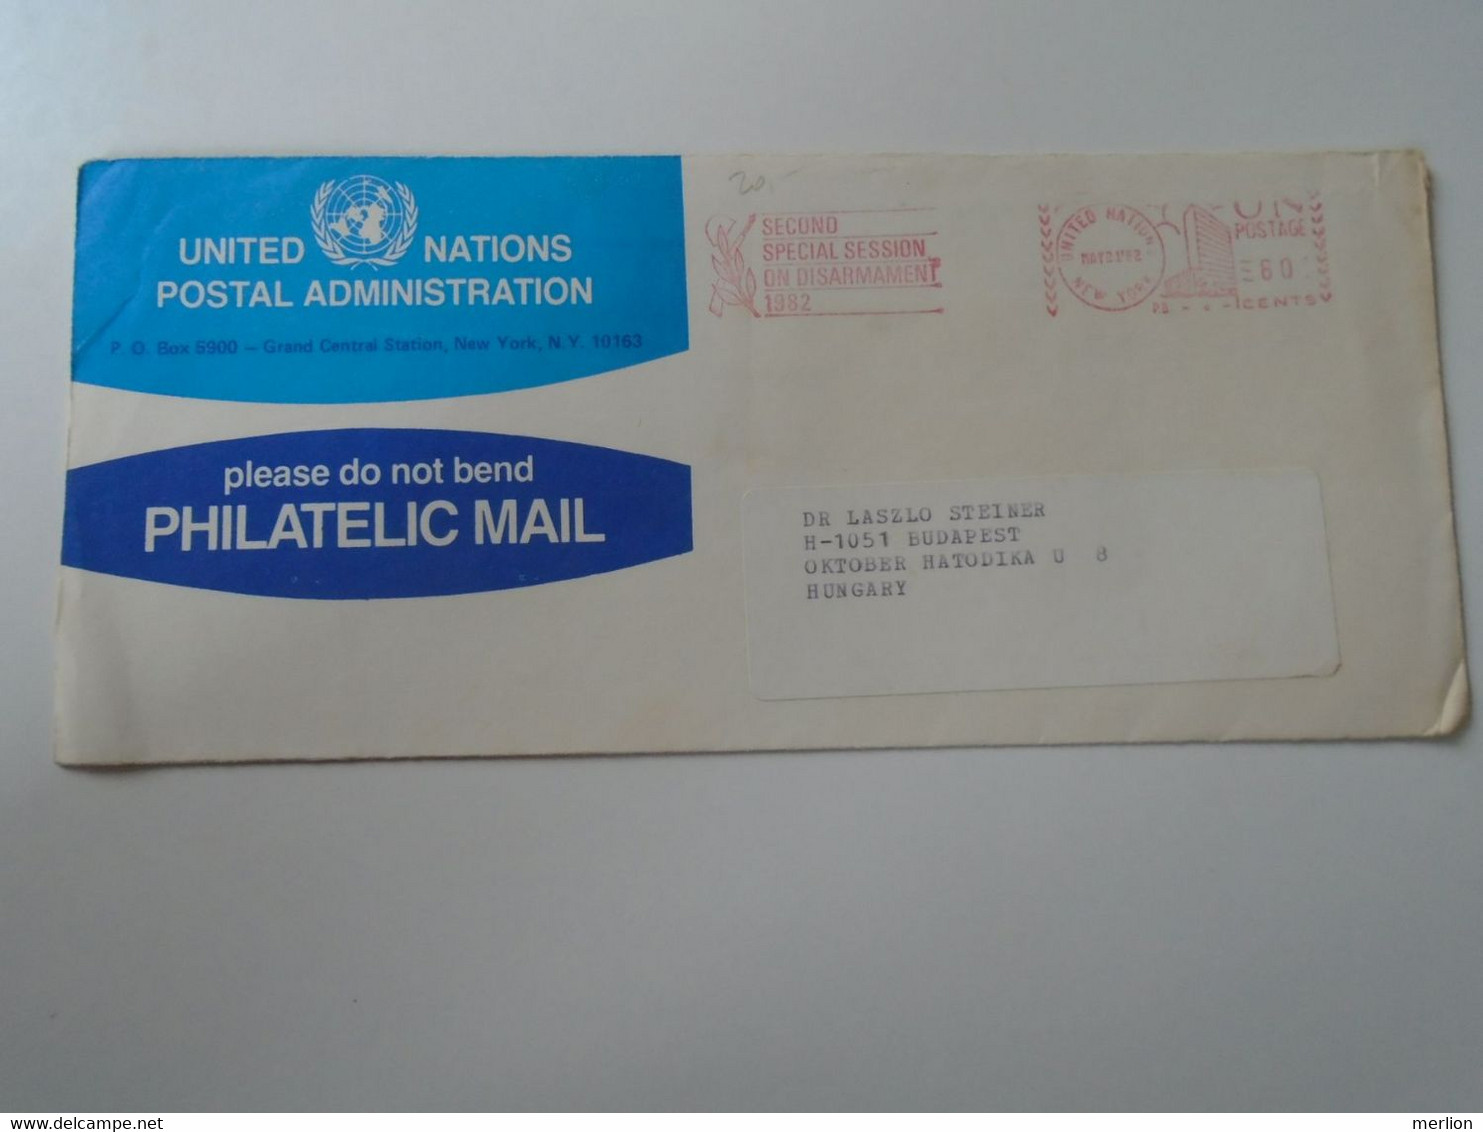 ZA399.26    United Nations - 1982 -  Cover   - Philatelic Mail   -ema Red Meter    Sent To Hungary - Covers & Documents